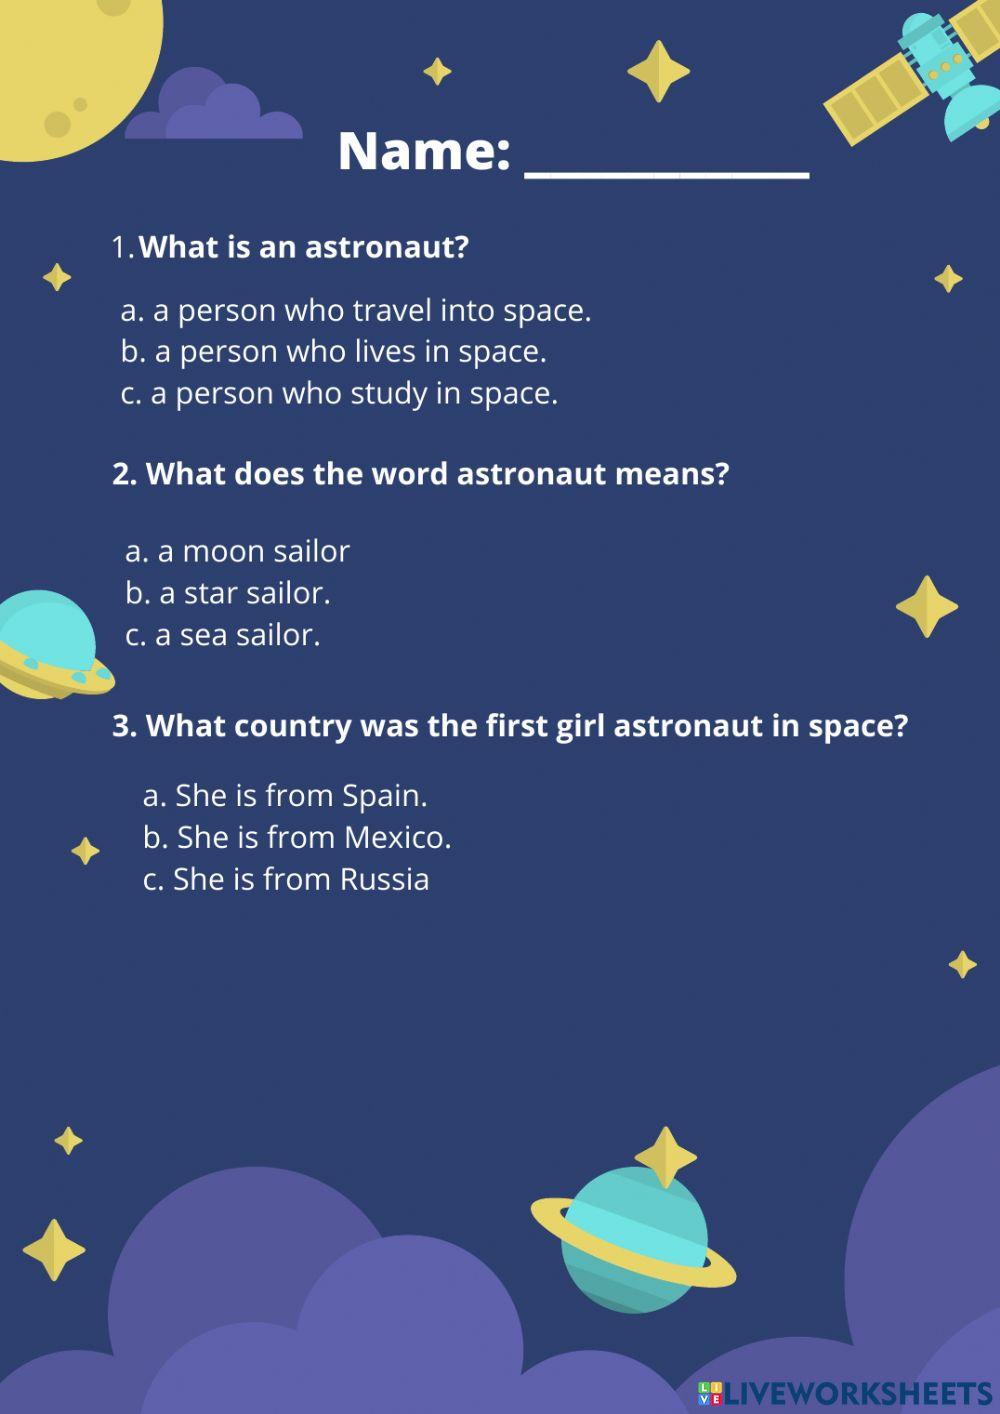 What do you know about astronauts